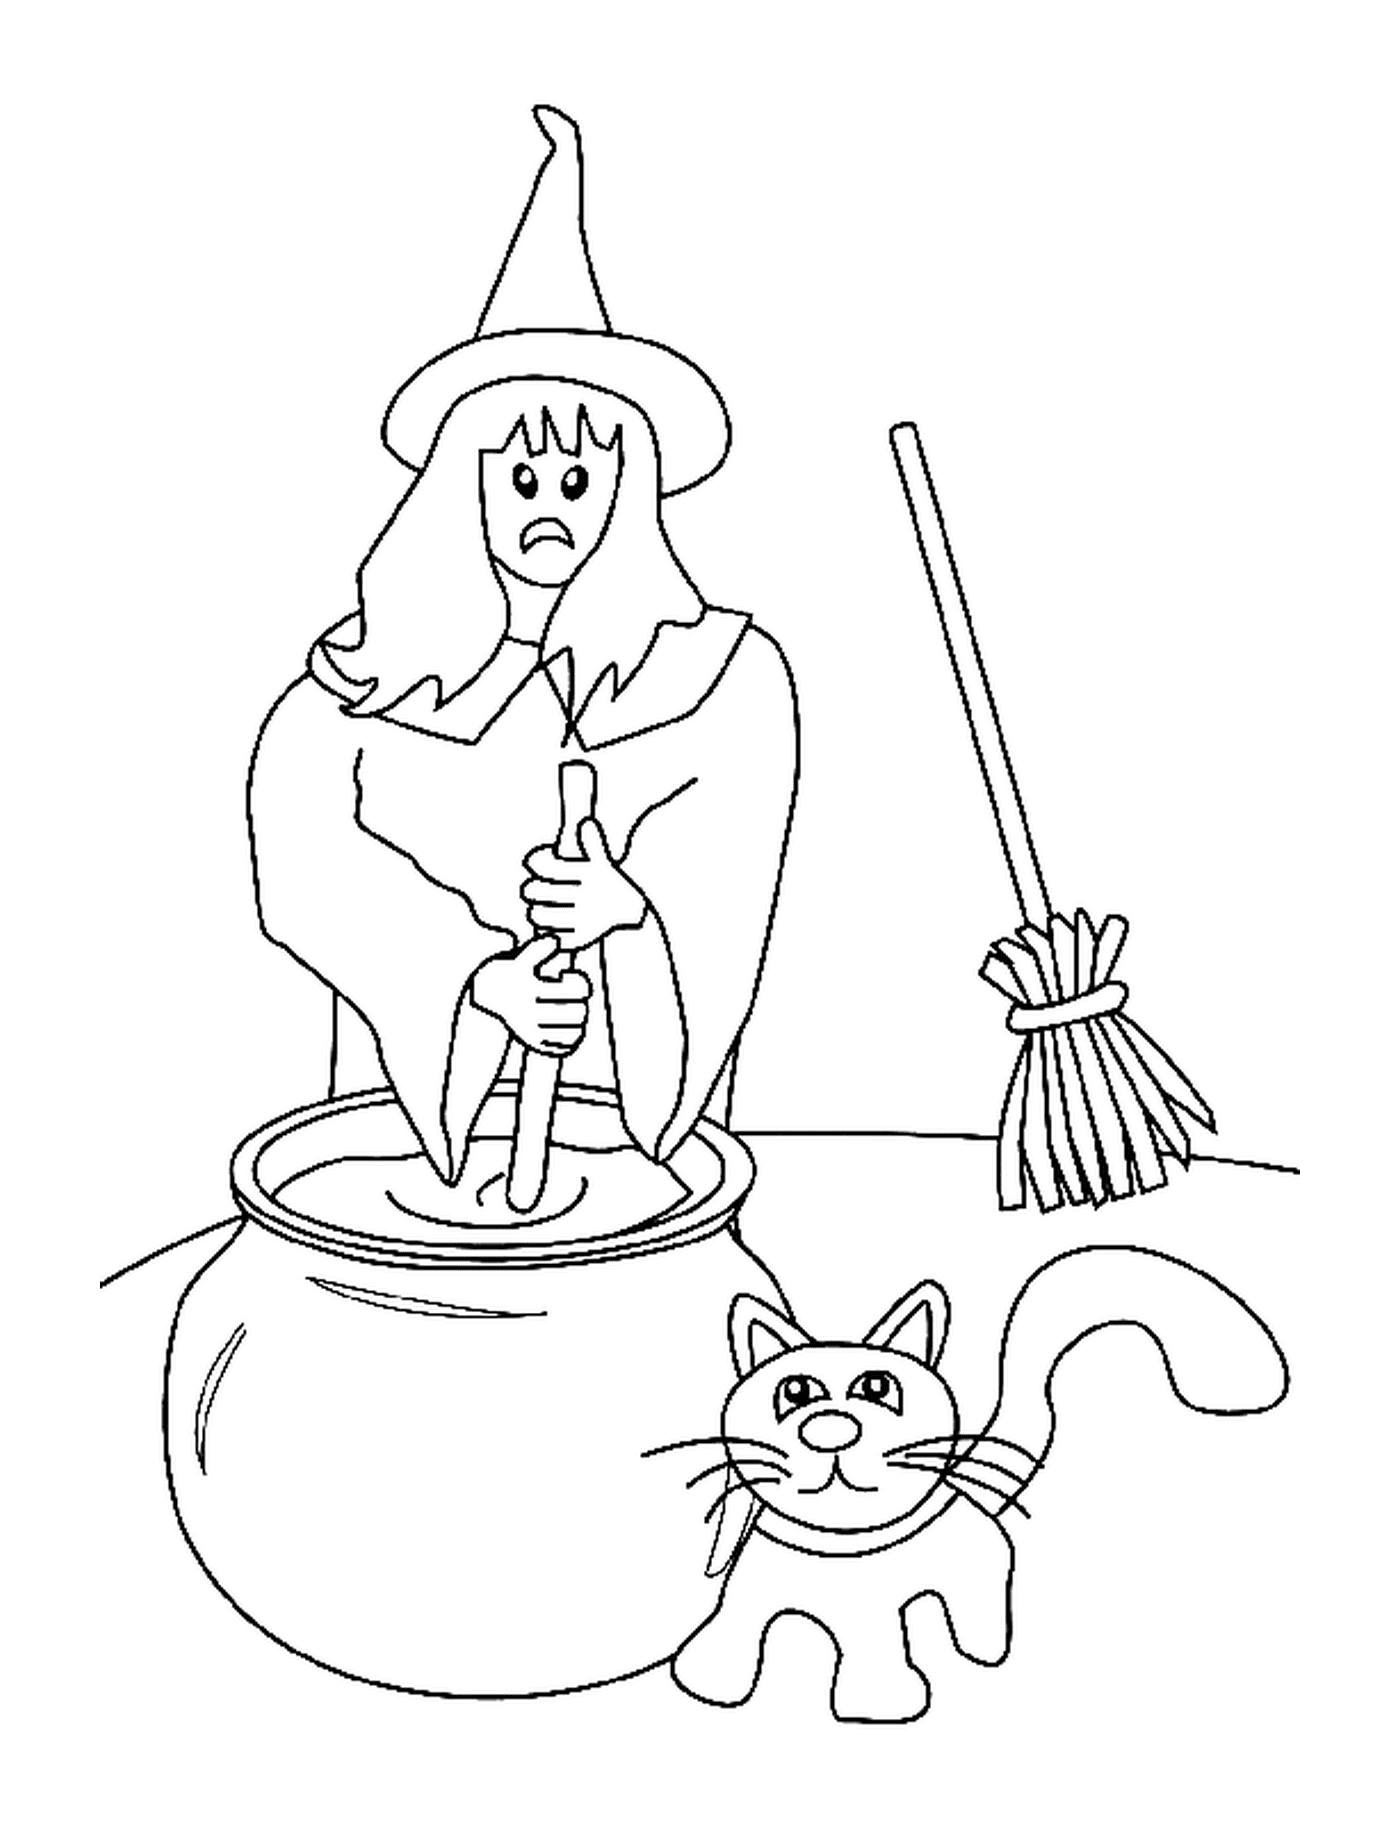  witch, broom, pot and cat 